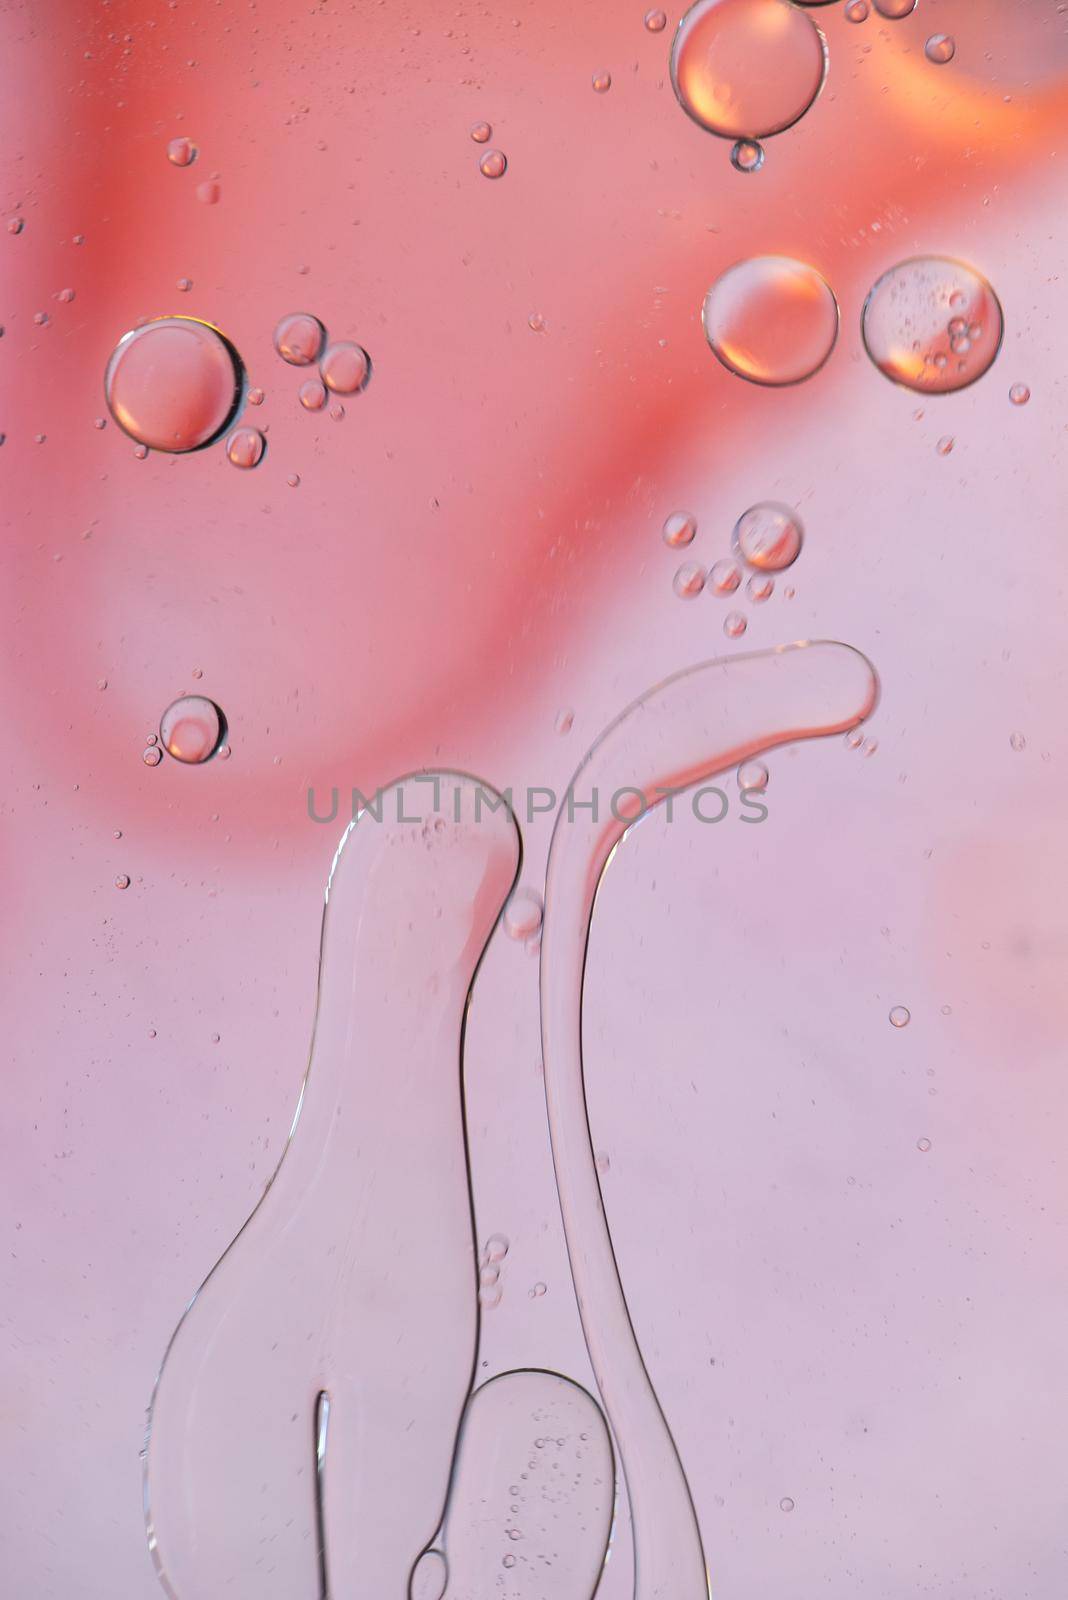 Oil drops in water. Defocused abstract psychedelic pattern image pink colored. Abstract background with colorful gradient colors. DOF.